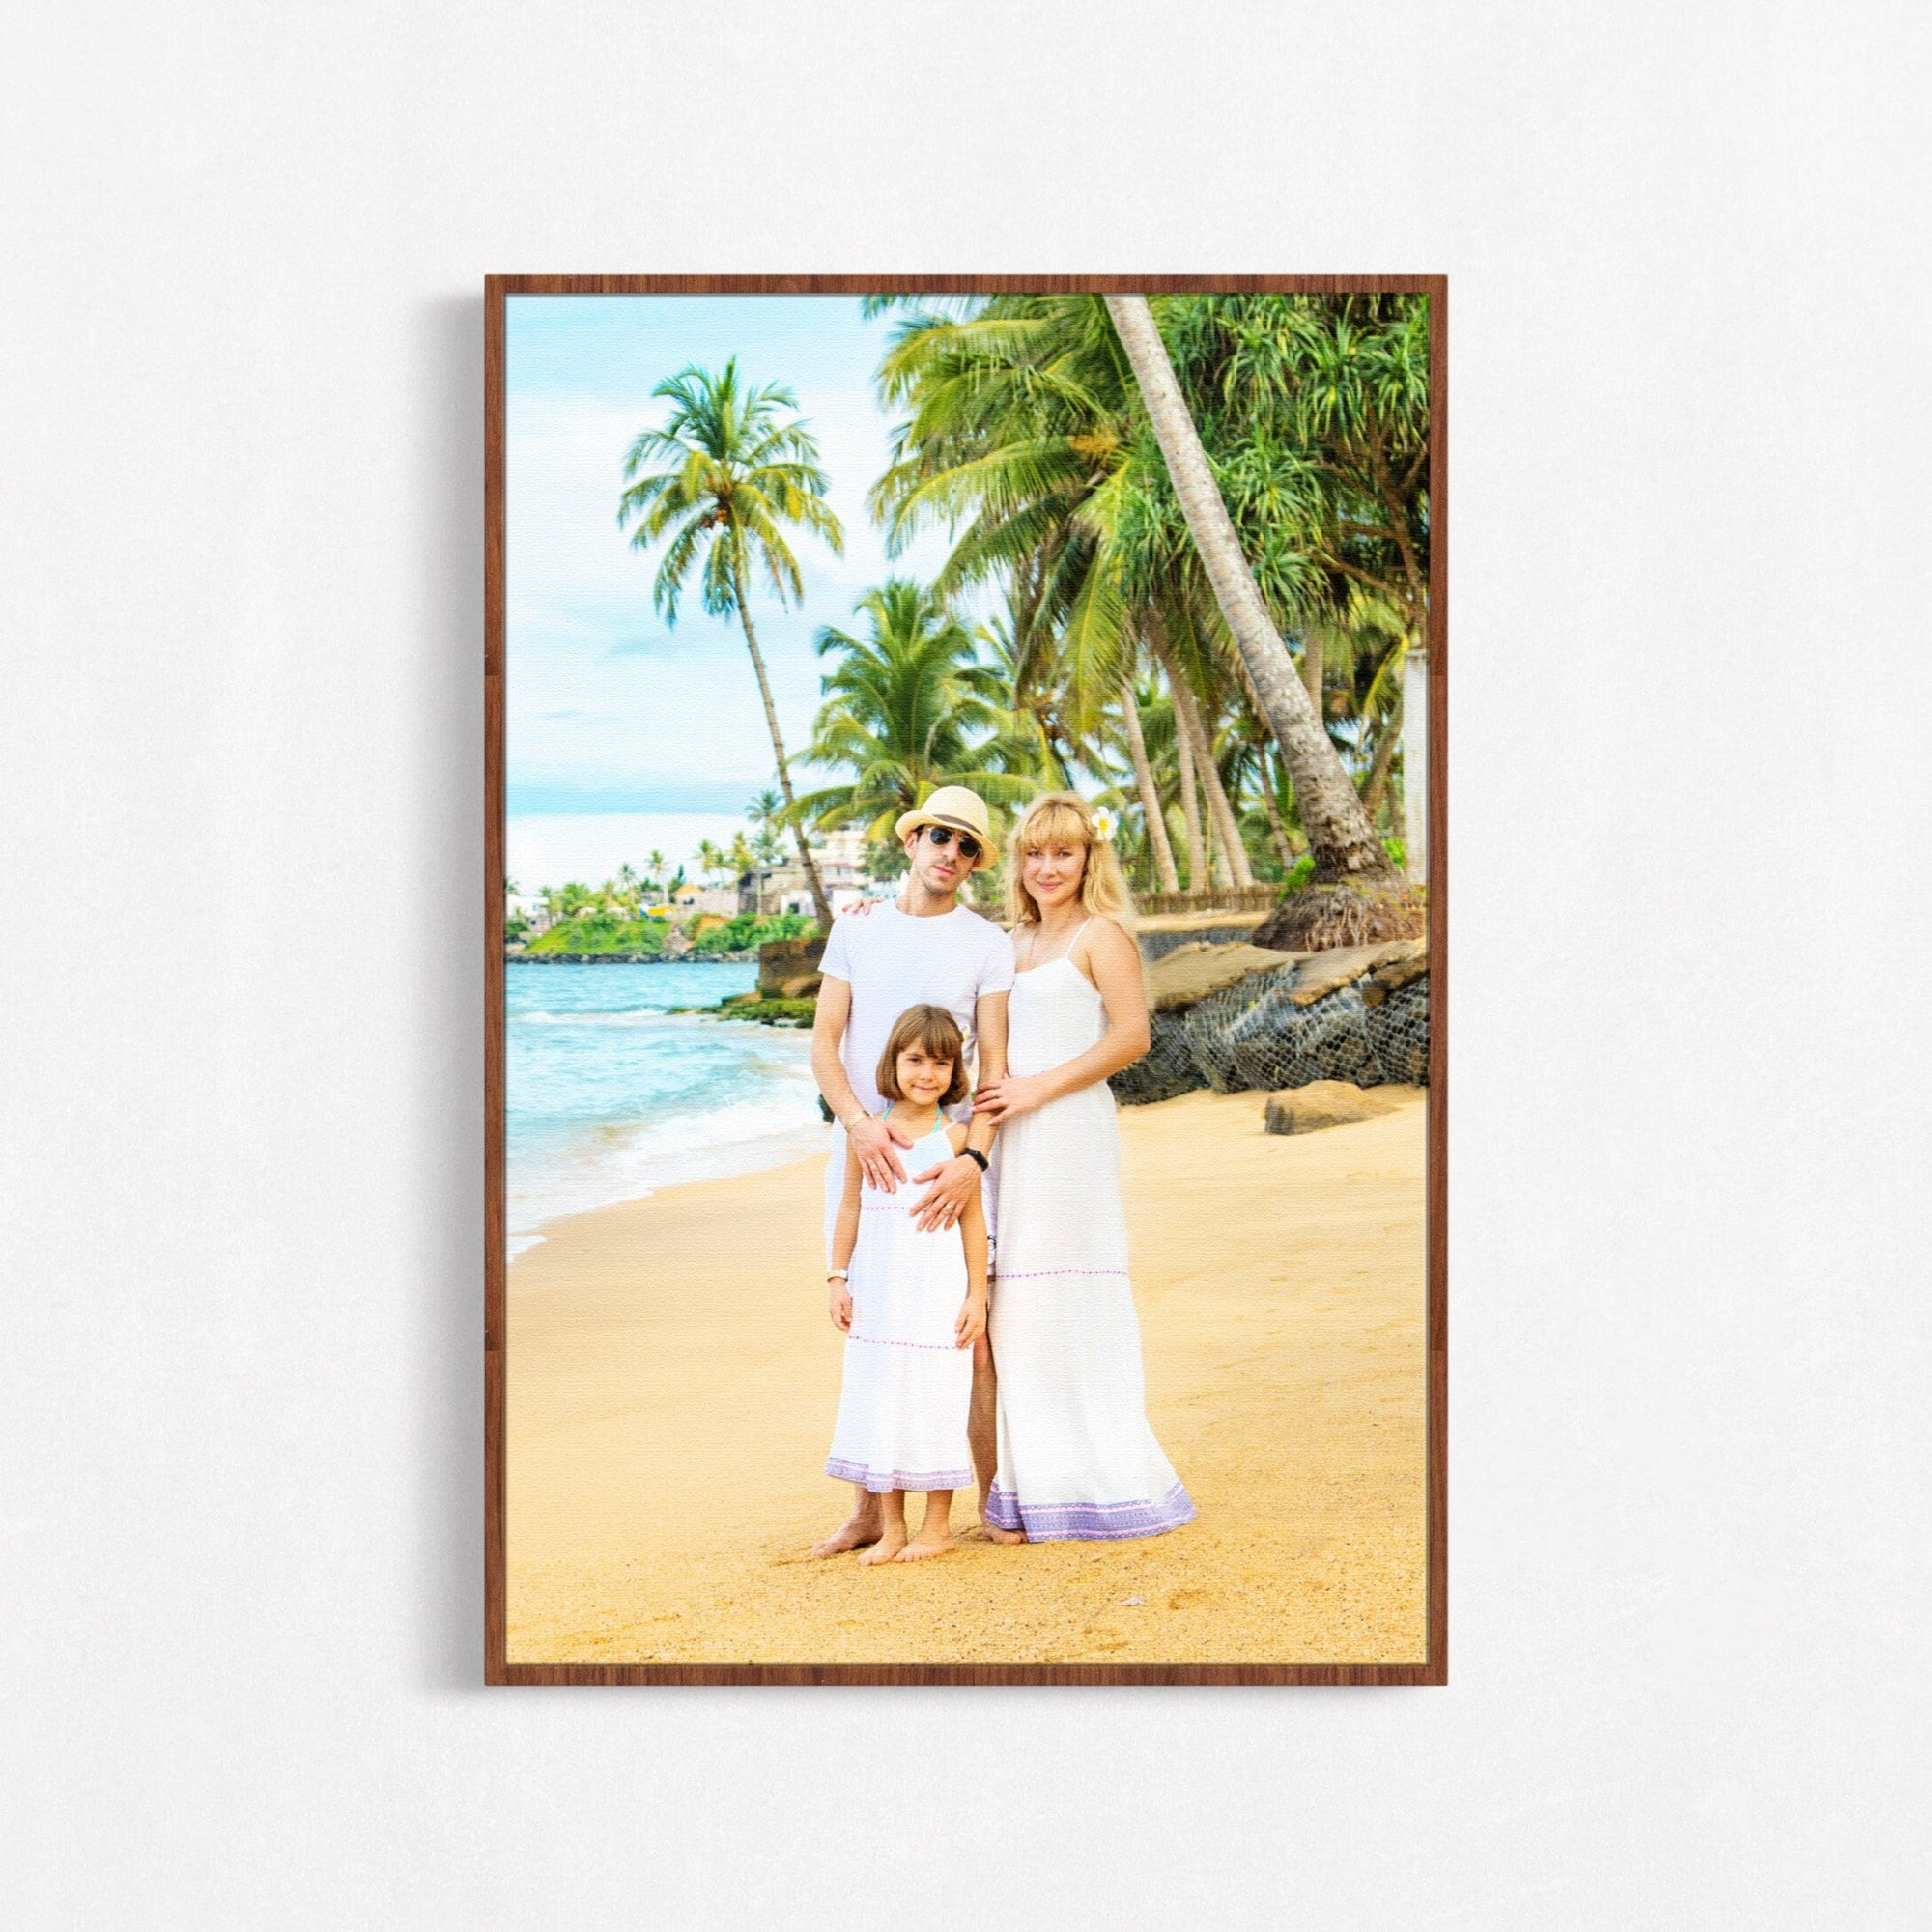 Framed photo canvas in black, white or pecan finish.